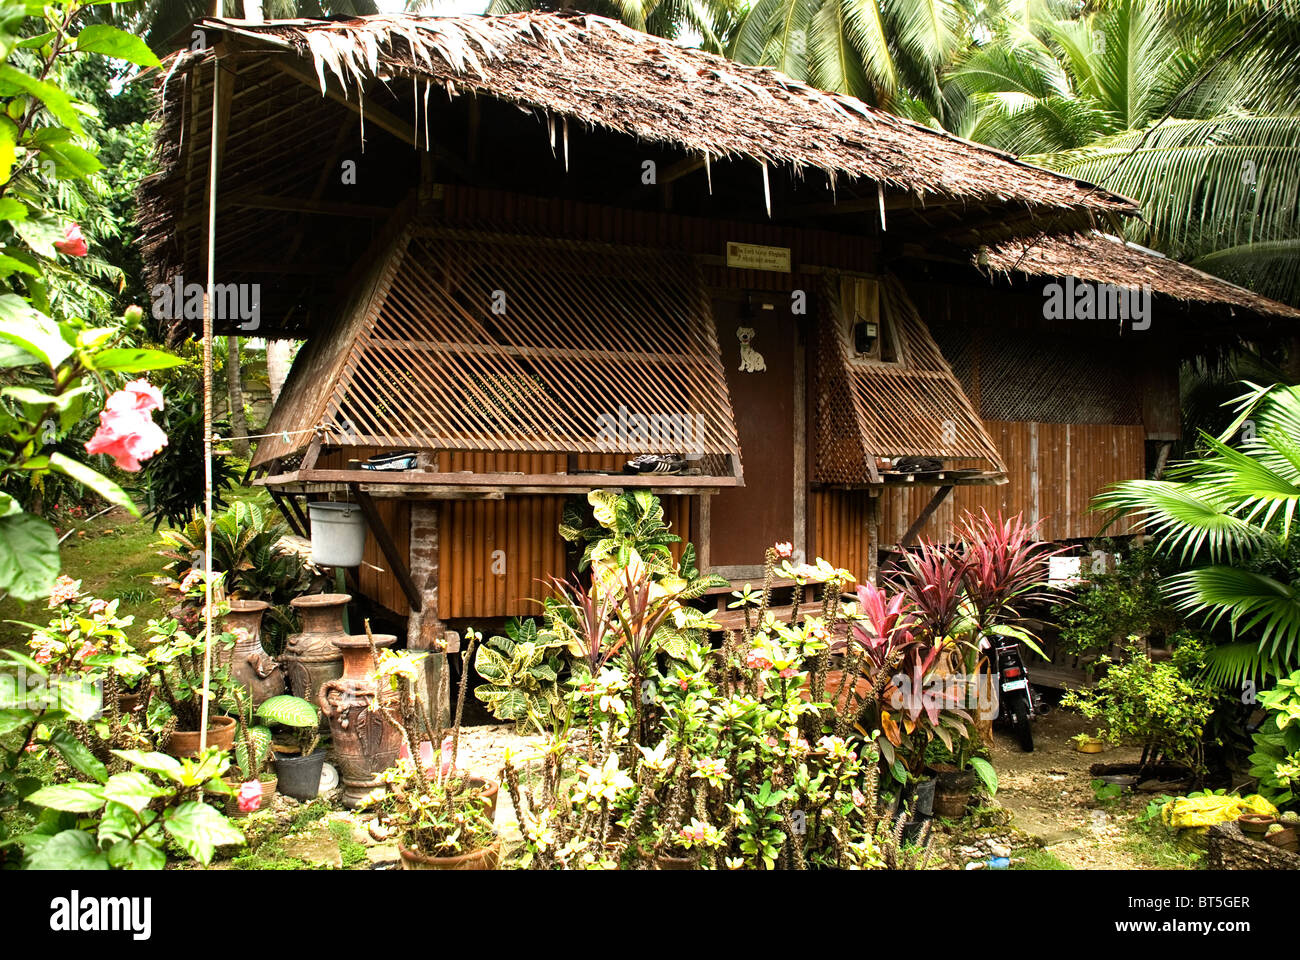 philippines, siquijor island, larena town, old wooden house Stock Photo